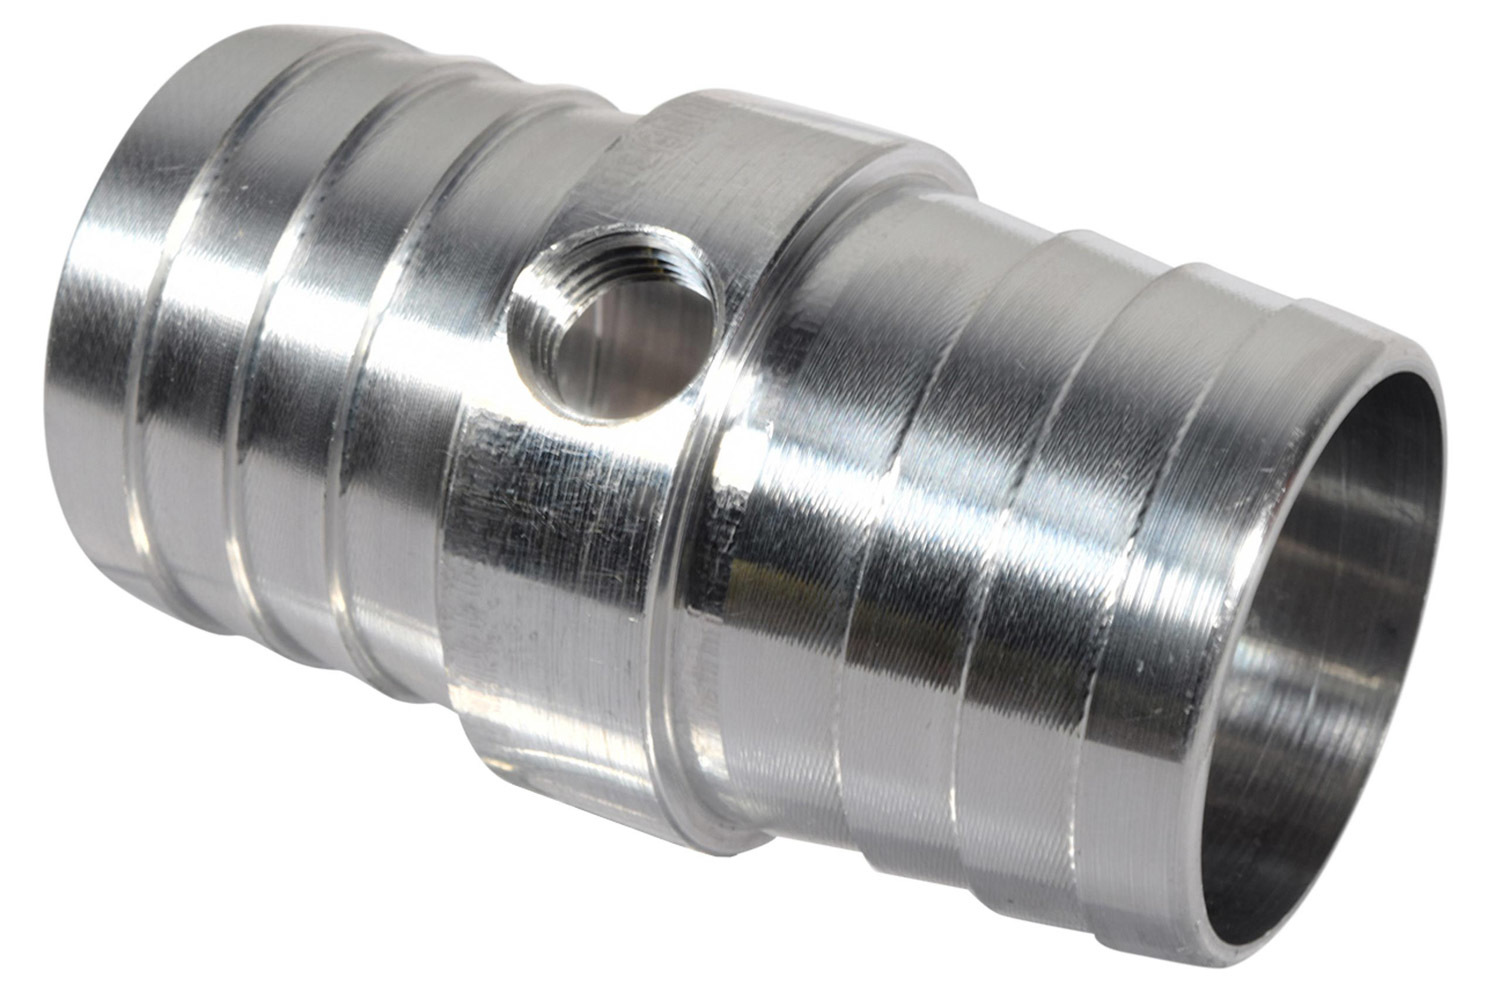 ICT Billet AN627-20X125 - Fitting, Steam Port Adapter, Straight, 1-1/4 in Hose Barb to 1-1/4 in Hose Barb, 1/8 in NPT Gauge Port, Aluminum, Natural, GM LS-Series, Each